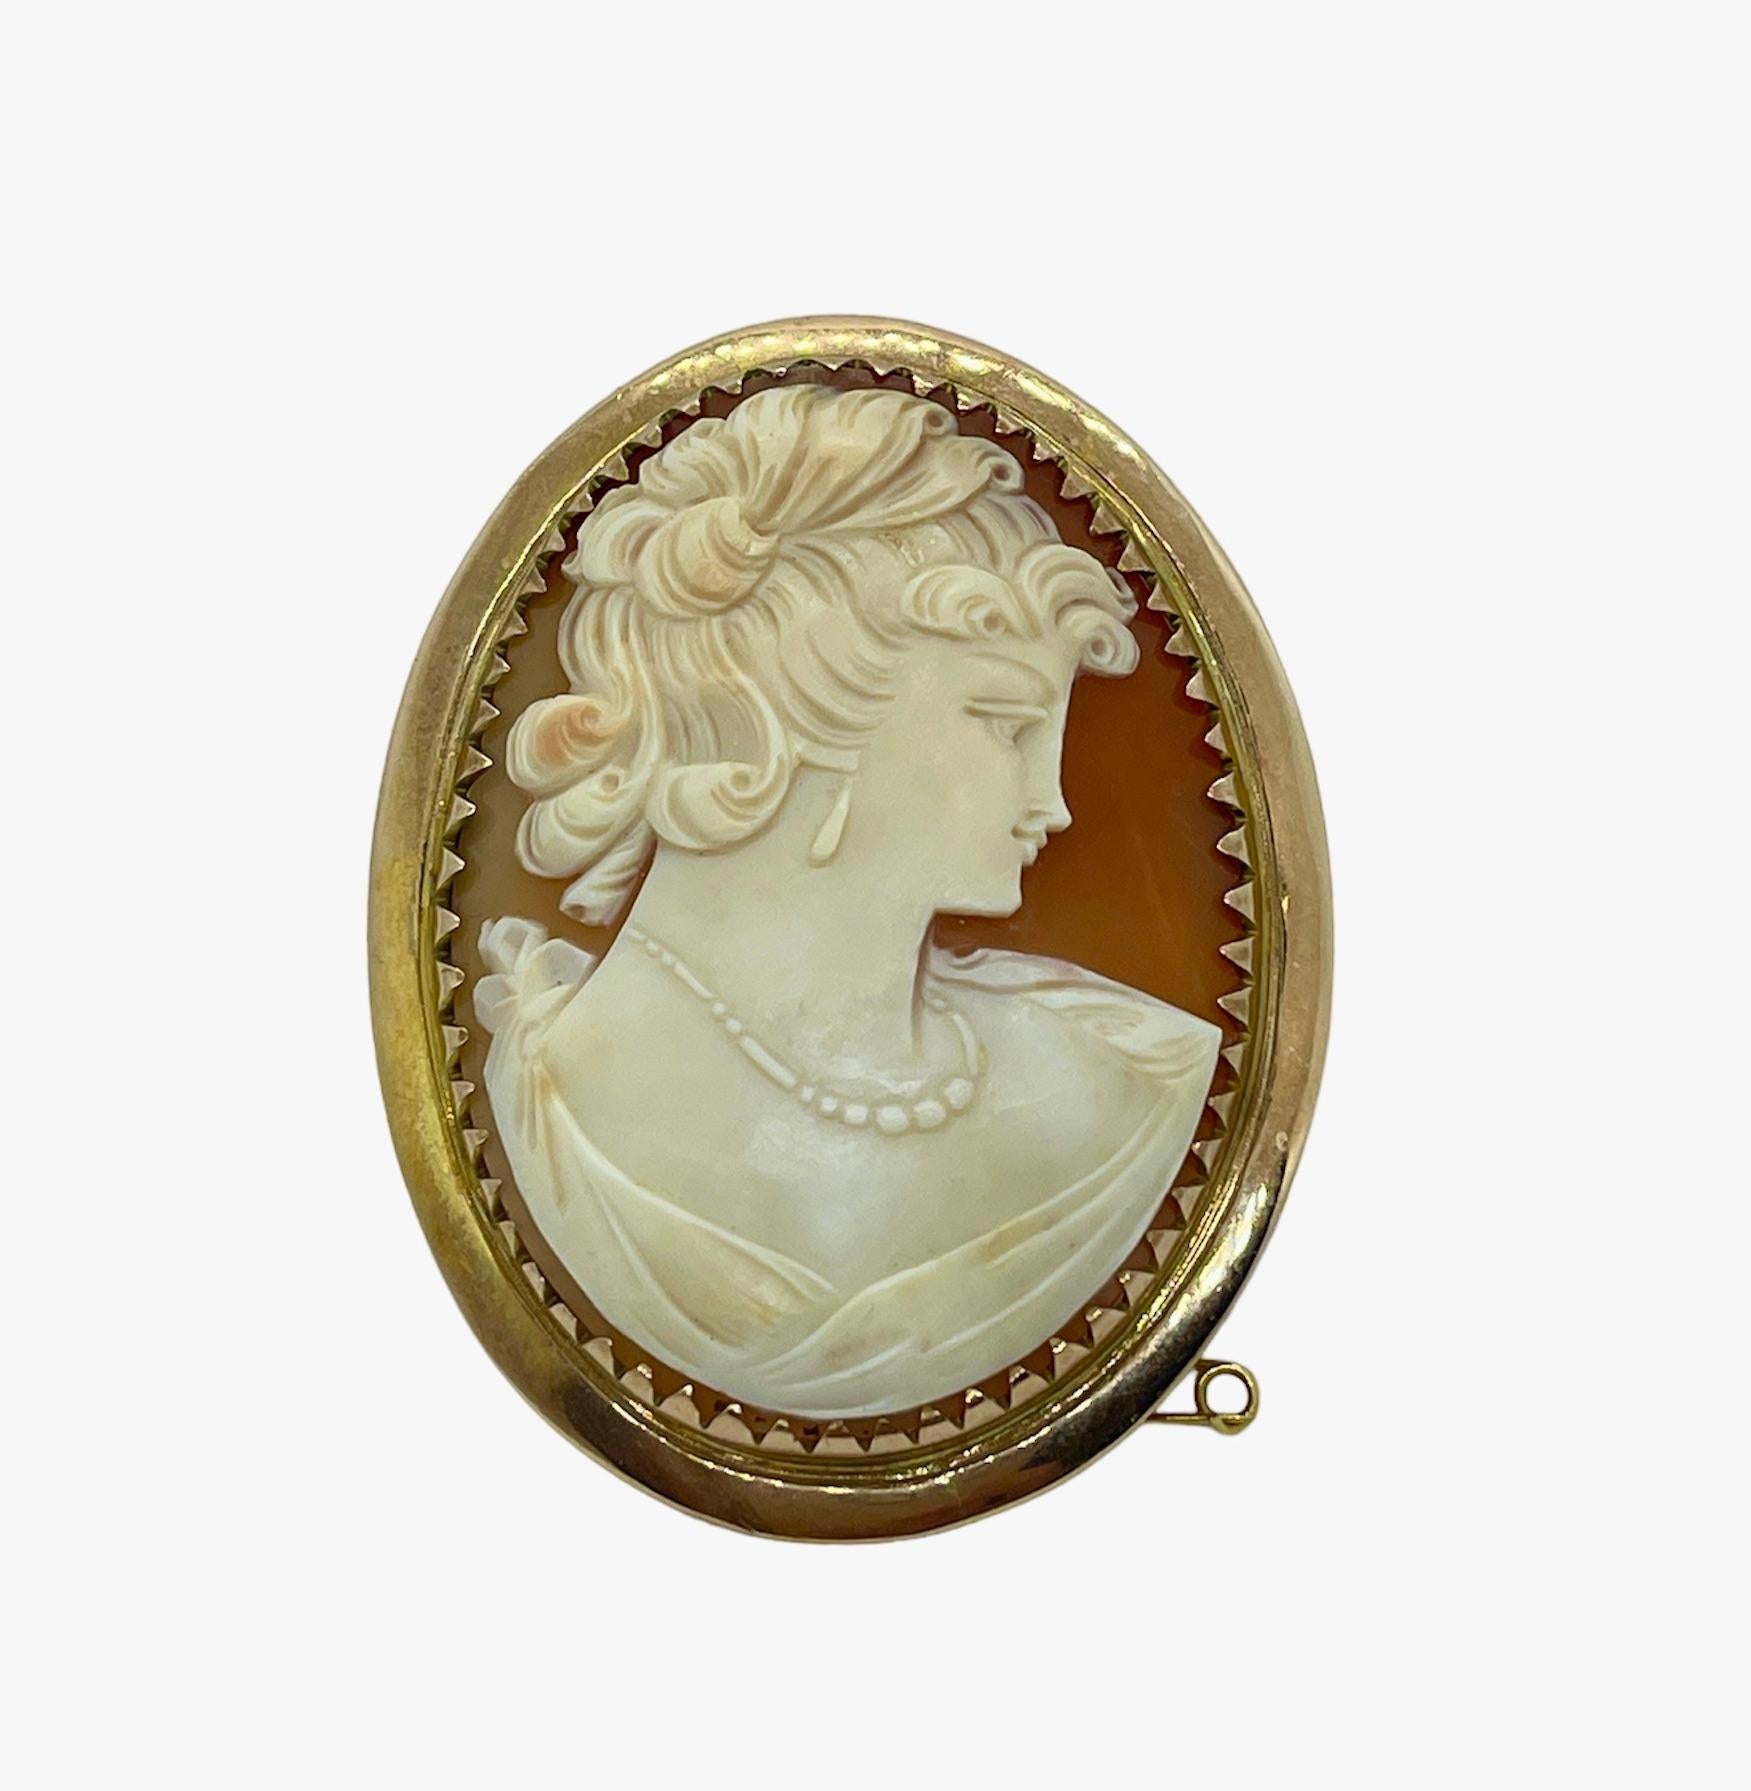 This brooch speaks quality.
It features a vintage Cameo that is hand carved in Sardonyx Shell (Conch shell) and depicts an elegant lady wearing a necklace and earrings.  Her curls are upswept and she has a whimsical, Mona Lisa smile!  Circa 1940s